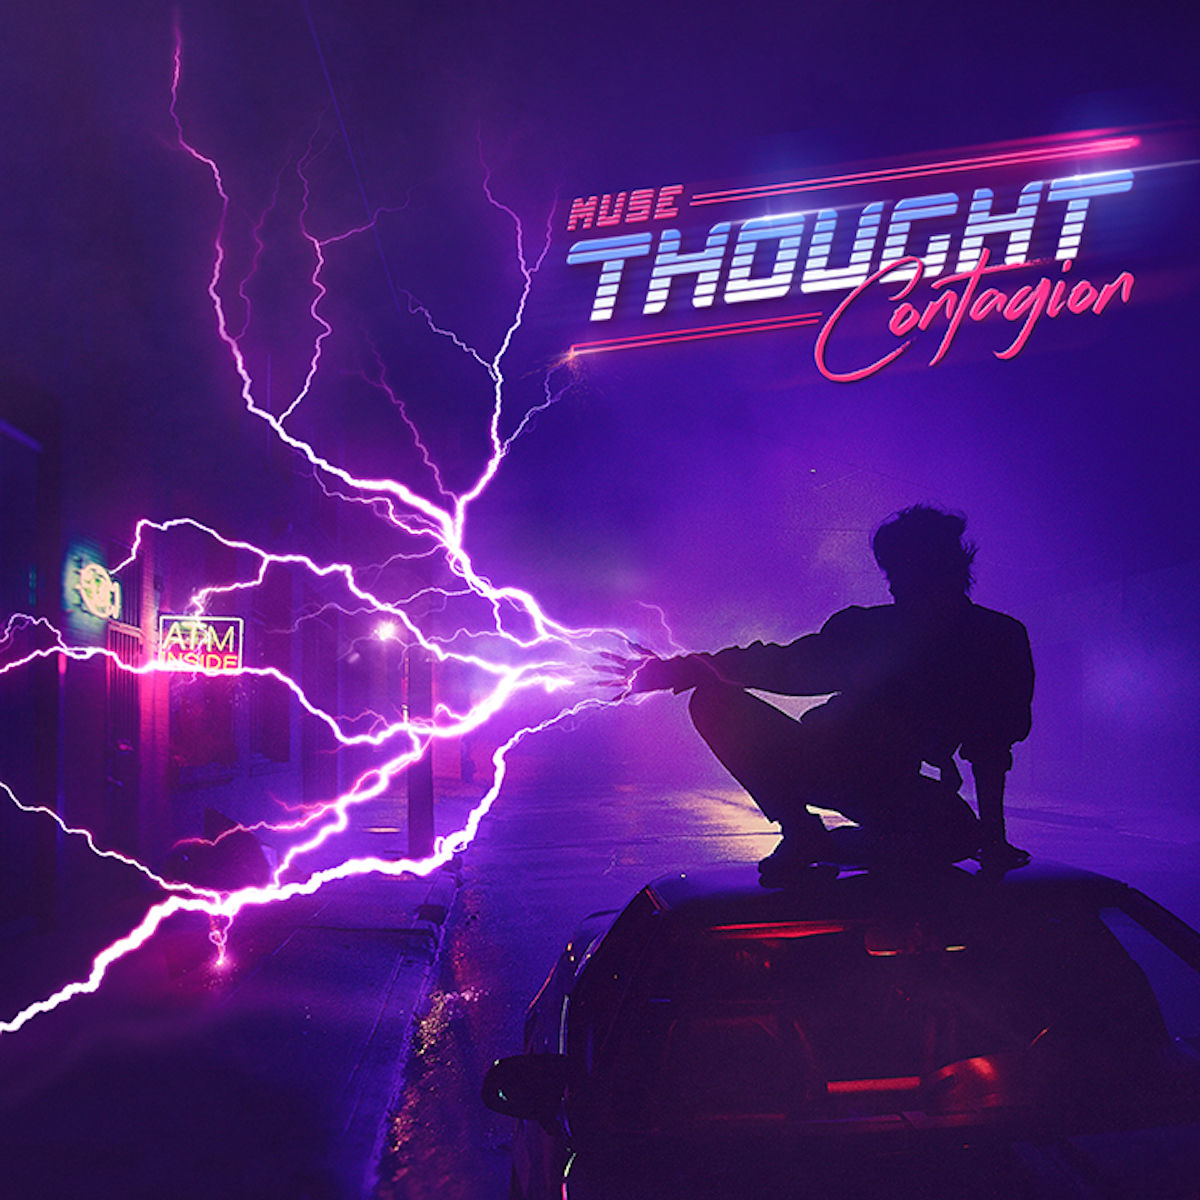 MUSEが新曲「Thought Contagion」をリリース！LINEアカウントもオープン！ music180216_muse_2-1200x1200